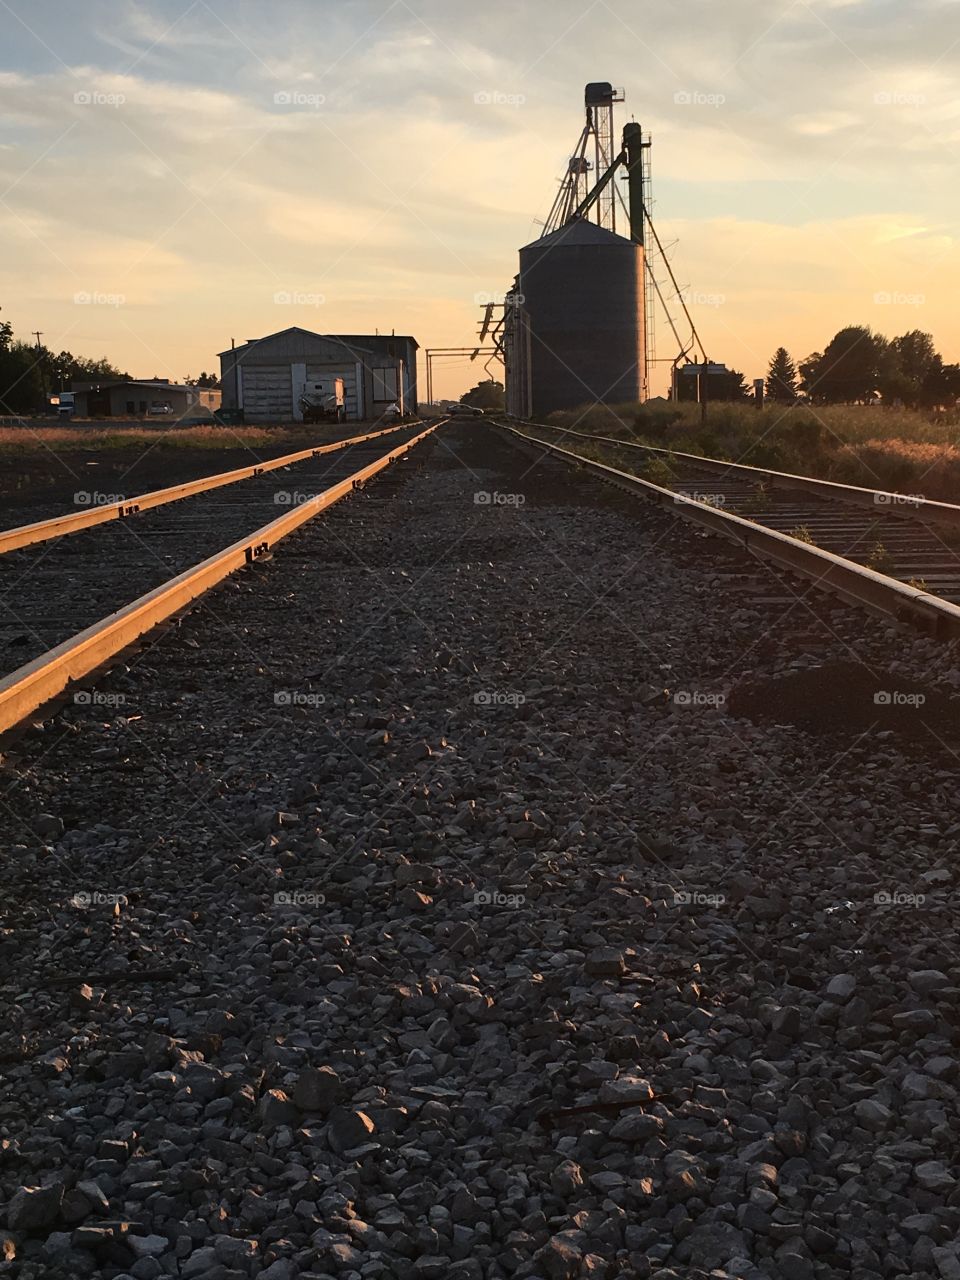 Standing between some train tracks at dusk